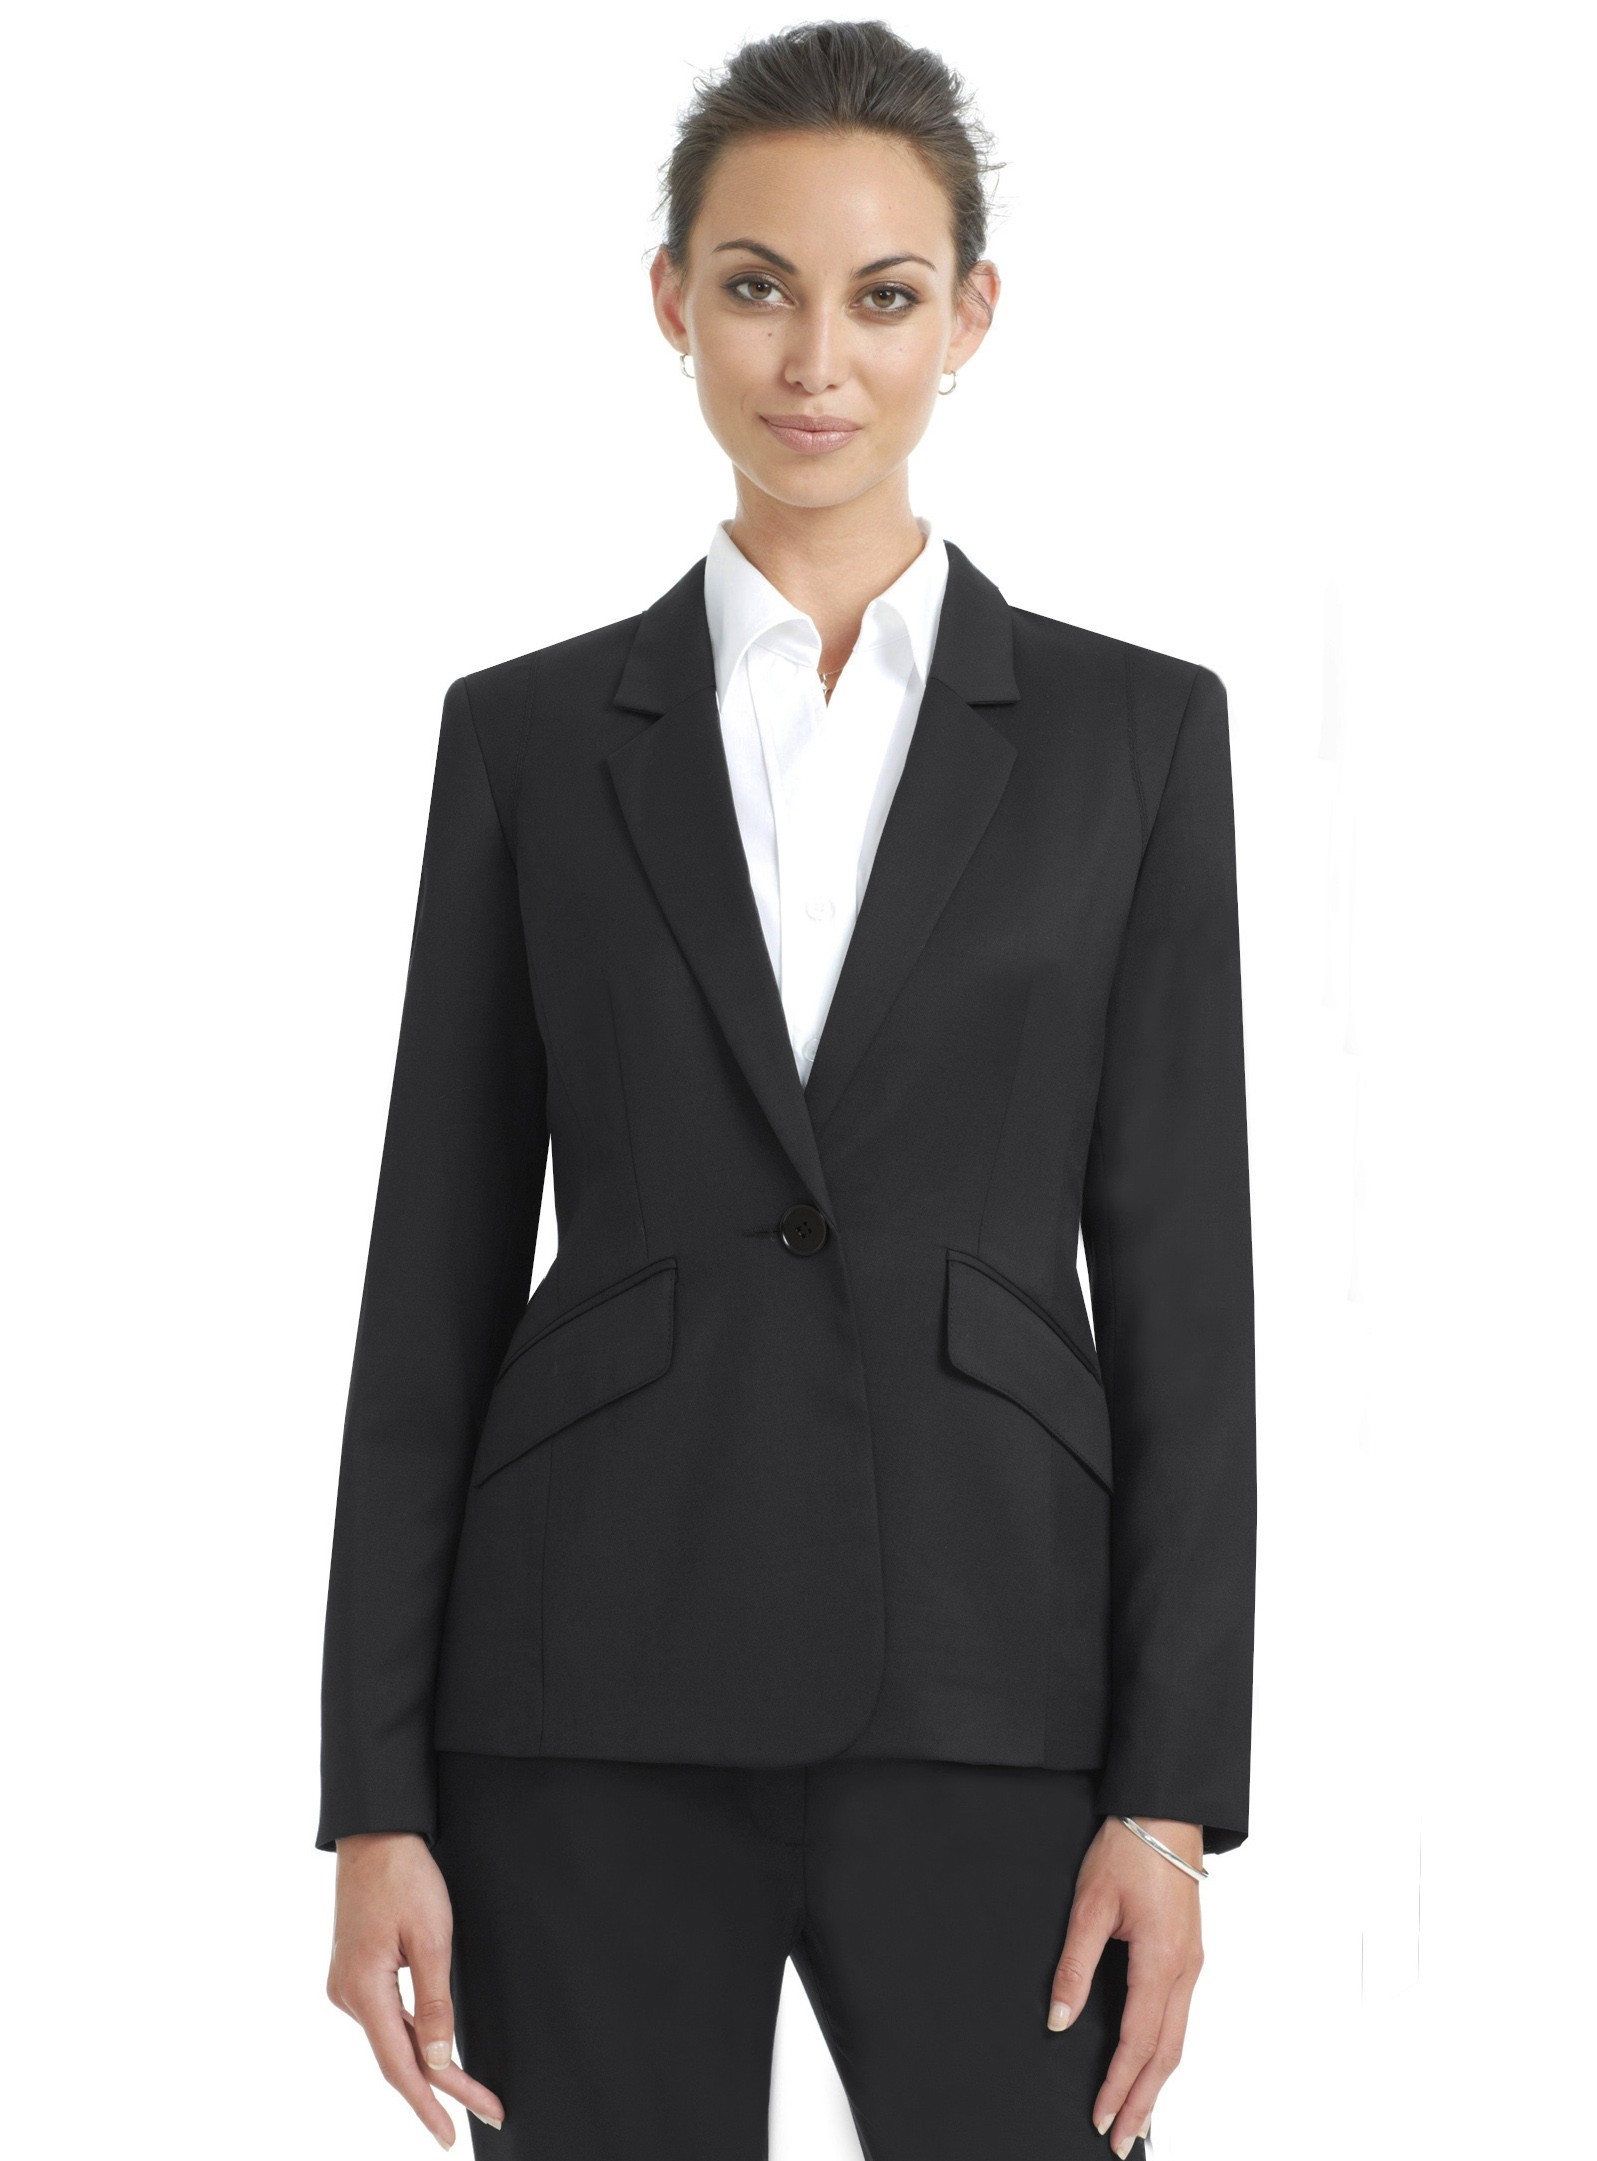 Buy Black Classic One Button Jacket in NZ | The Uniform Centre